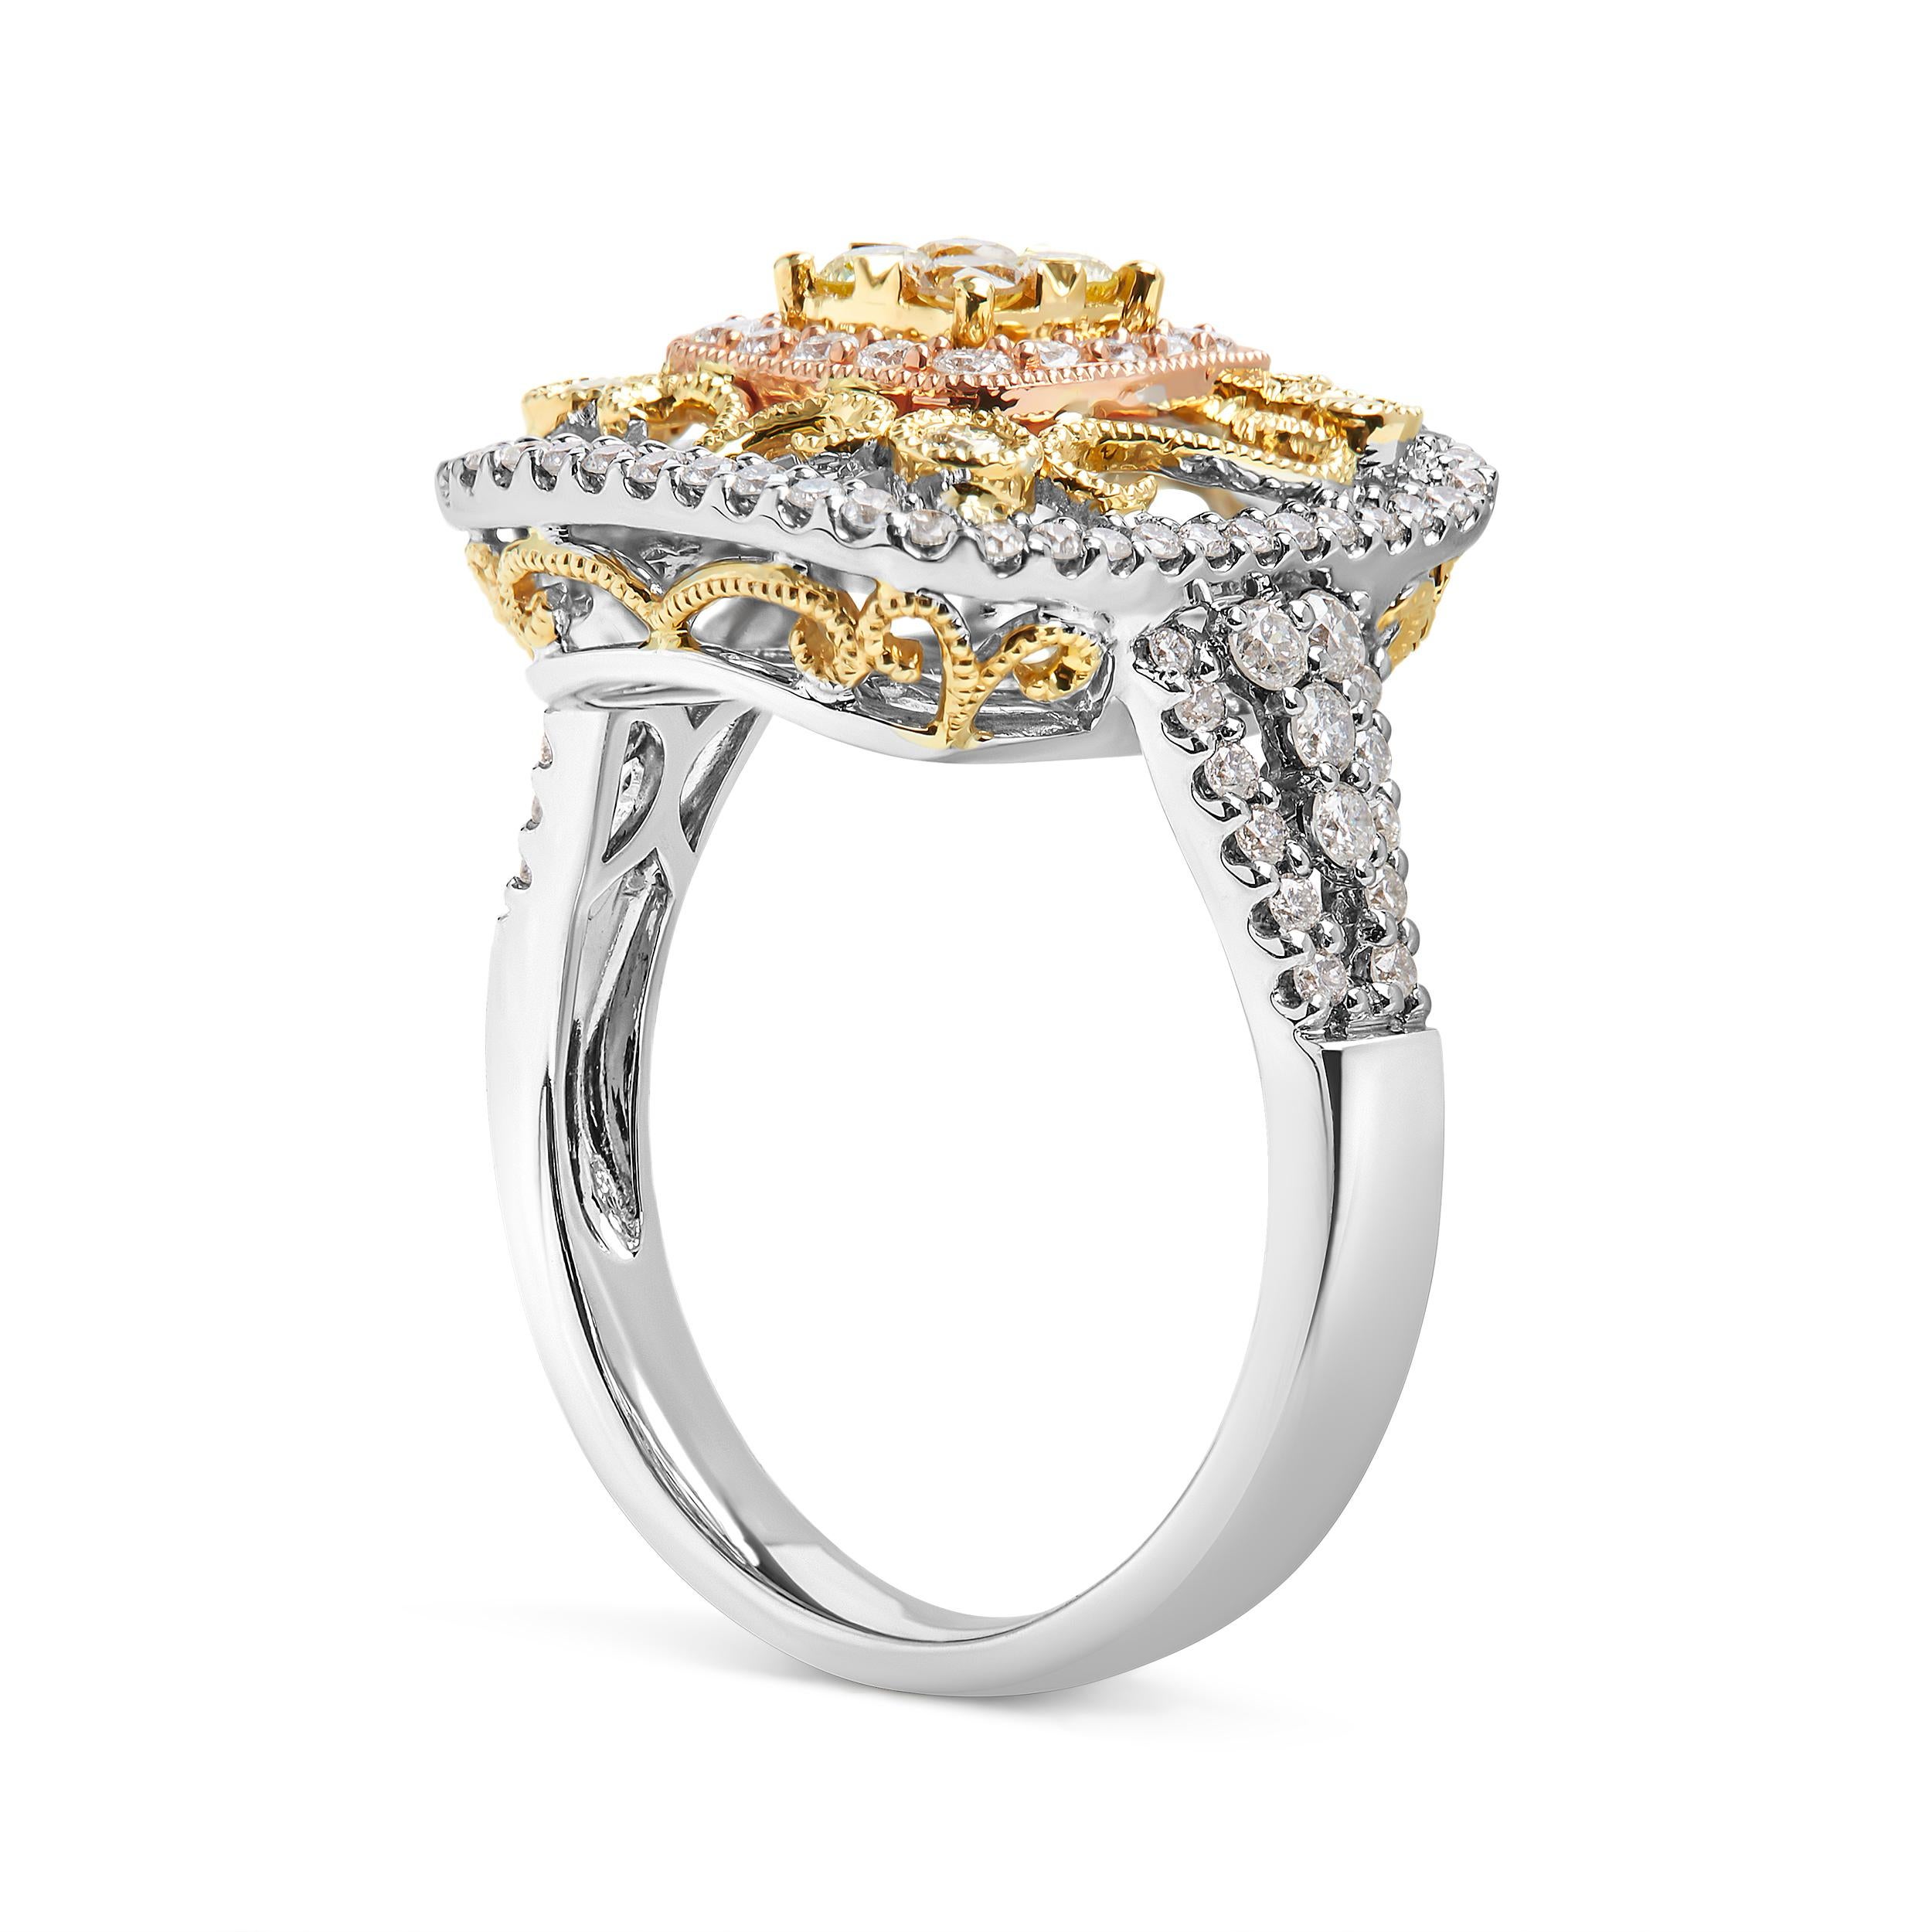 Round Cut 14K Tri-Toned Gold 1.0 Carat Diamond Halo and Milgrain Cocktail Cluster Ring